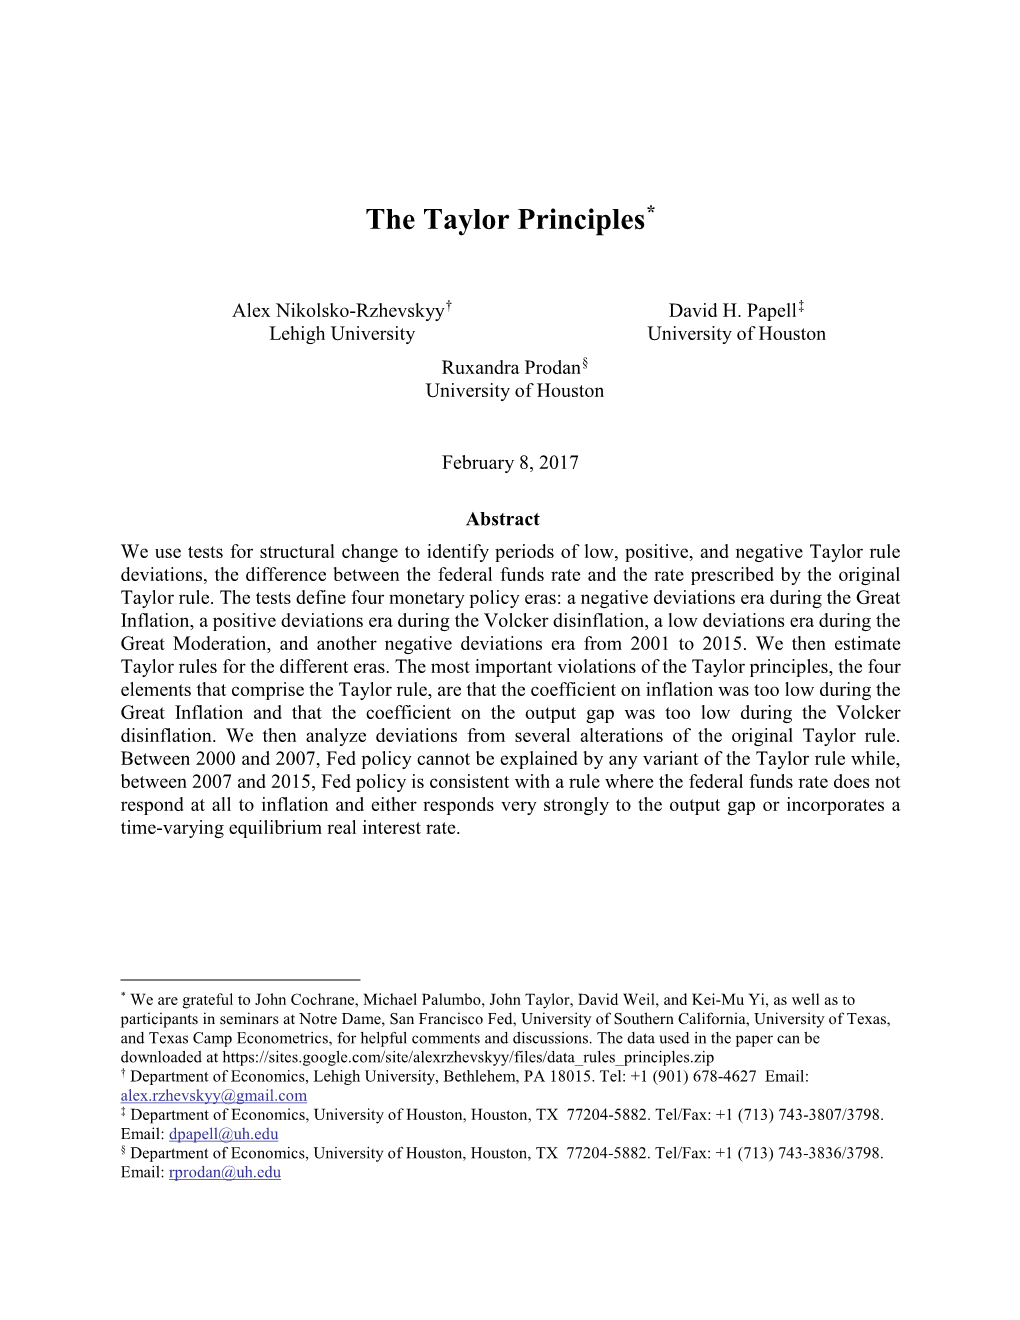 Taylor Rules and the Great Inflation," Journal of Macroeconomics, Volume 34, Issue 4, 903–918